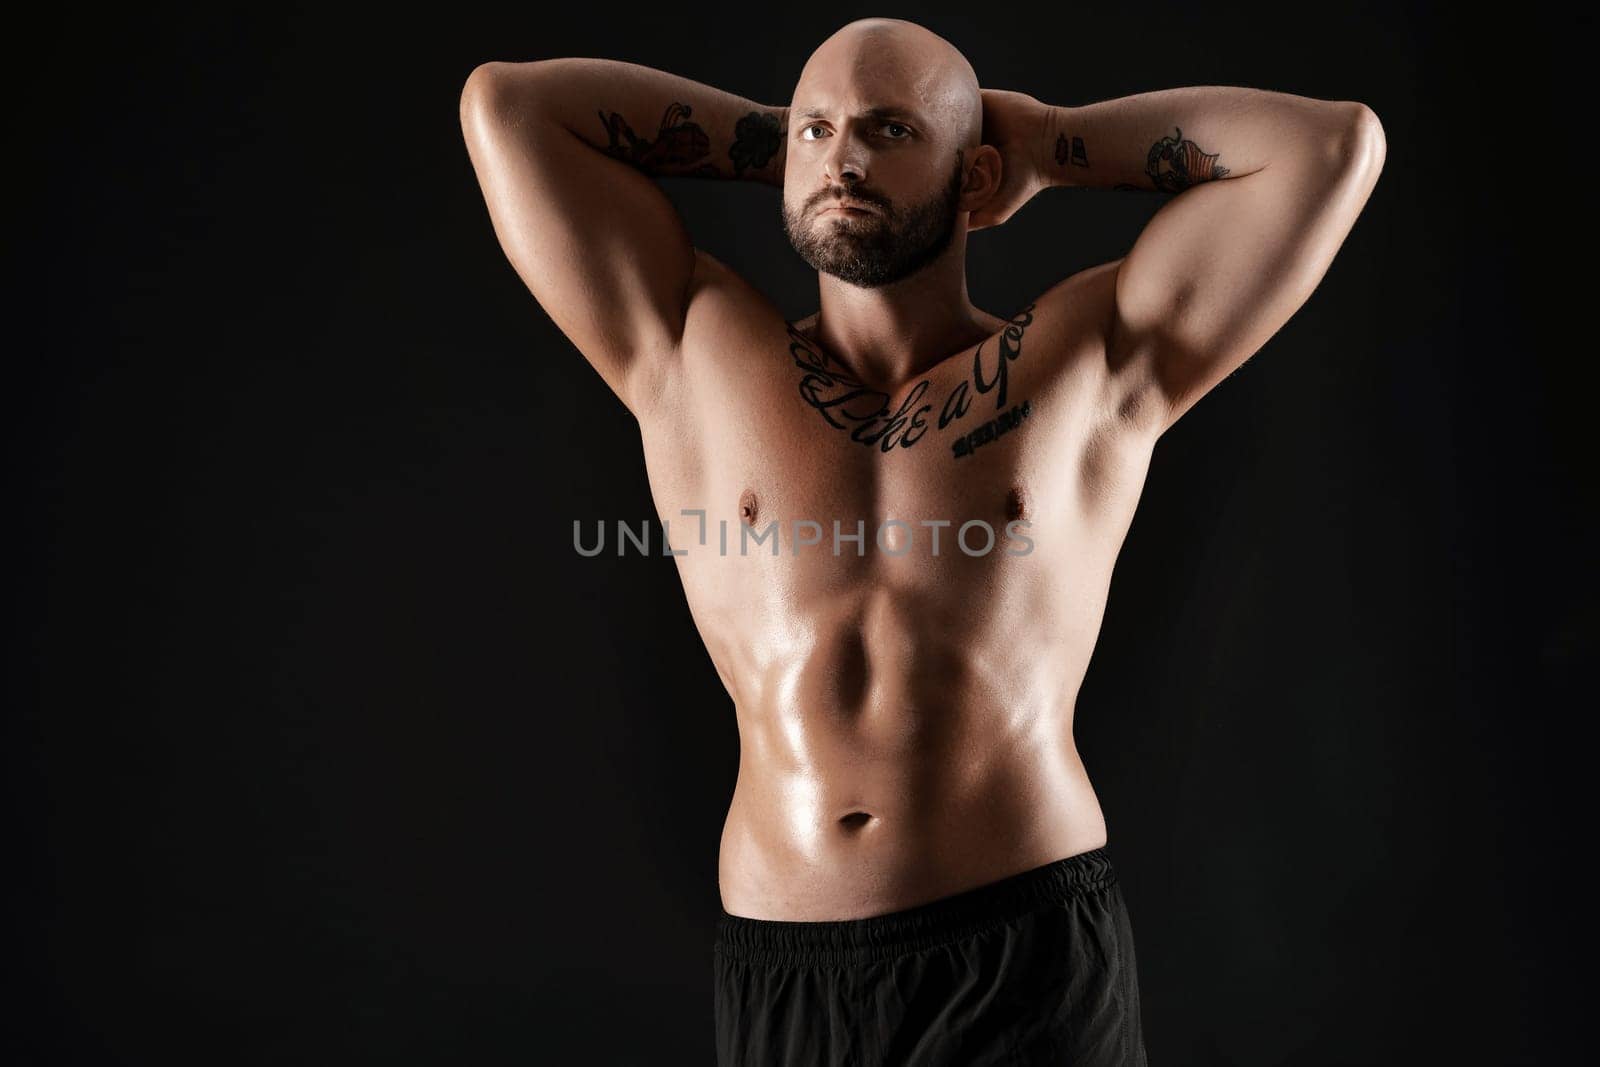 Good-looking bald, bearded, tattooed fellow in black shorts is demonstating his muscles while posing against a black background and looking away. Chic muscular body, fitness, gym, healthy lifestyle concept. Close-up portrait.